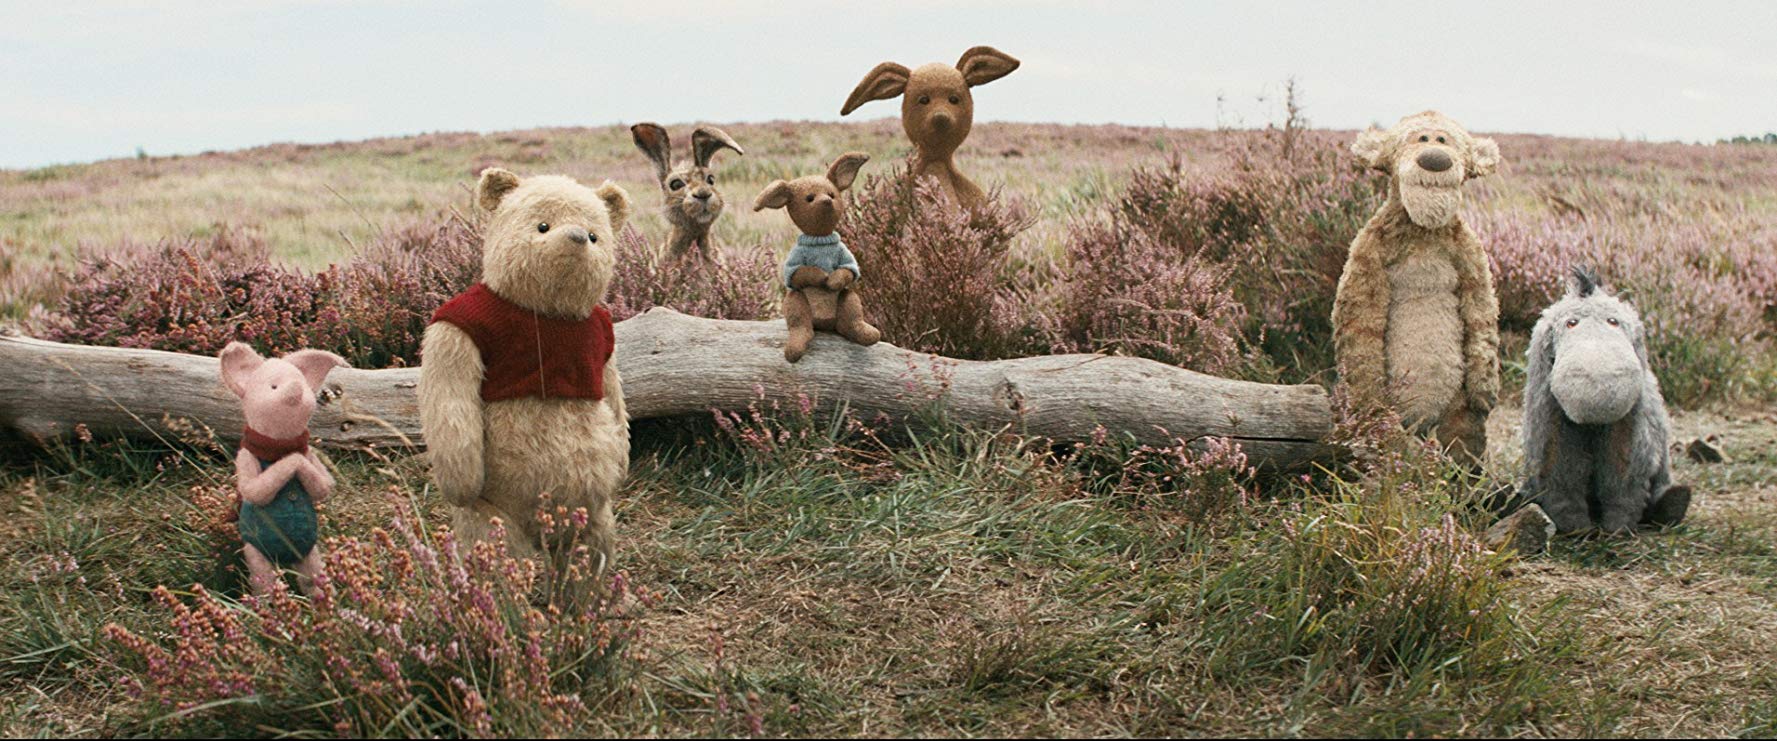 A scene from 'Christopher Robin," showing Piglet, Winnie the Pooh, Rabbit, Kanga, Roo, Tigger and Eeyore standing together in a field near a long old log.